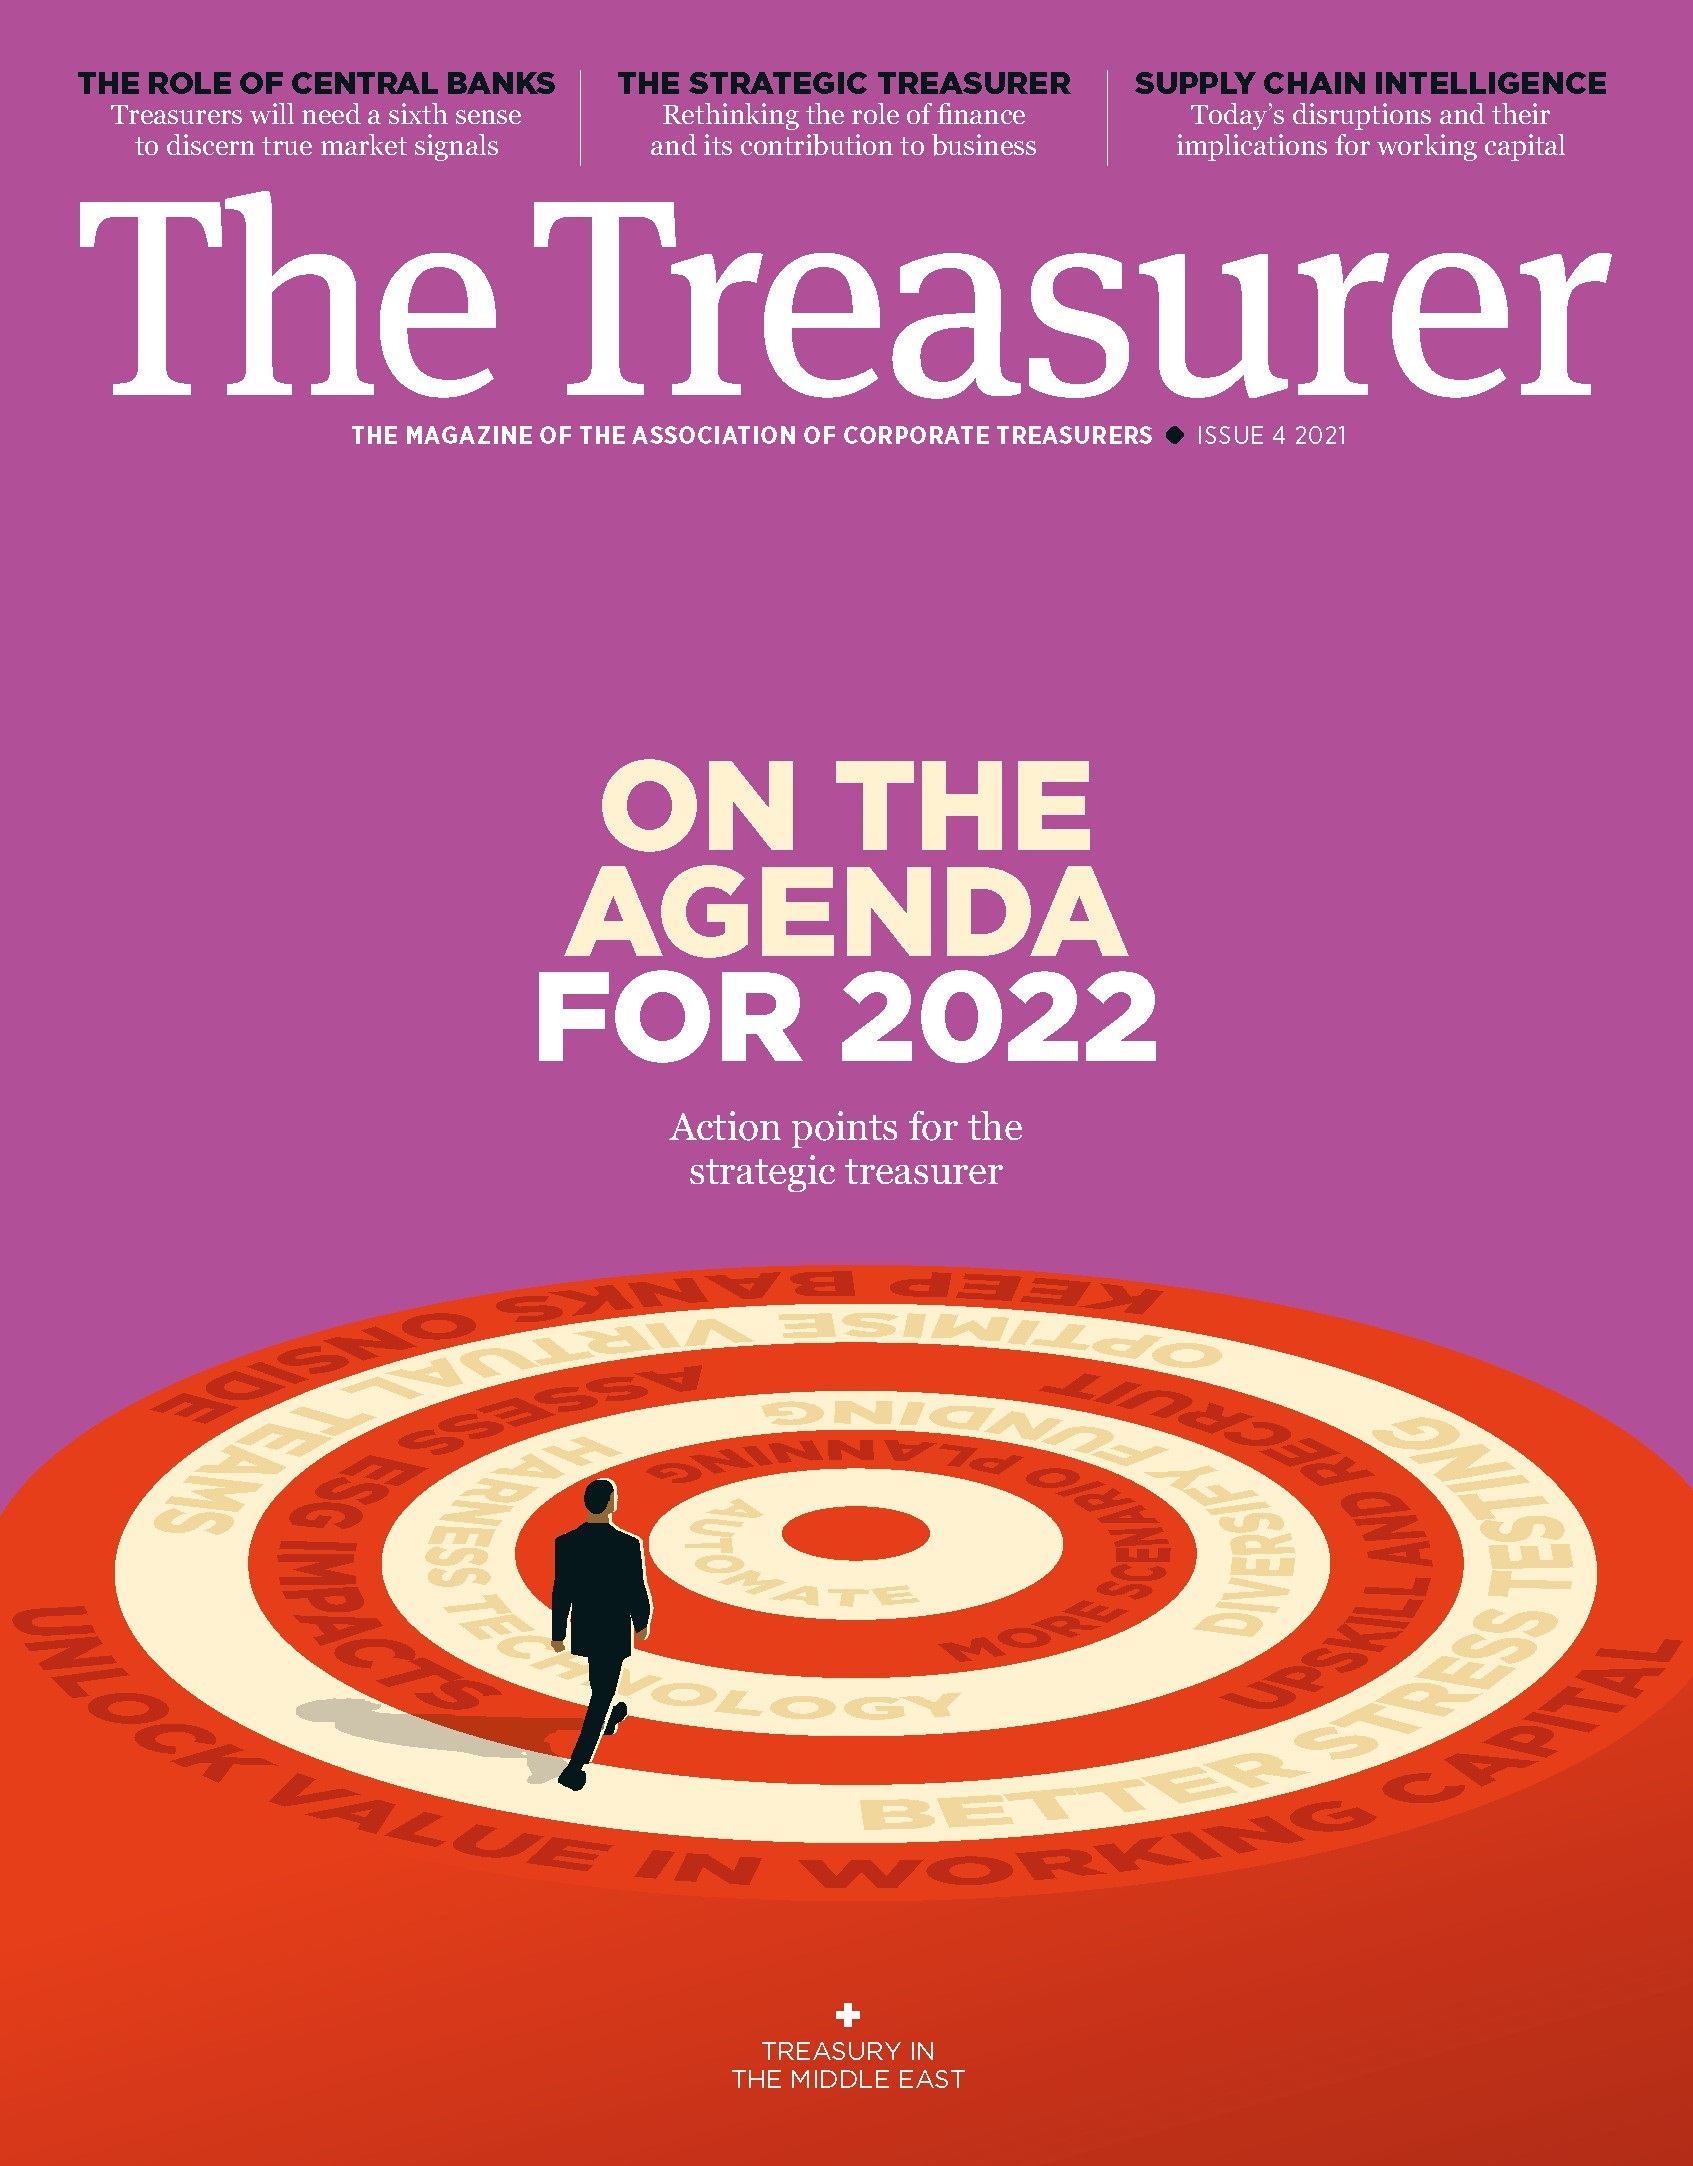 Cover of The Treasurer magazine with image of treasurer standing on target and the headline Agenda for 2022